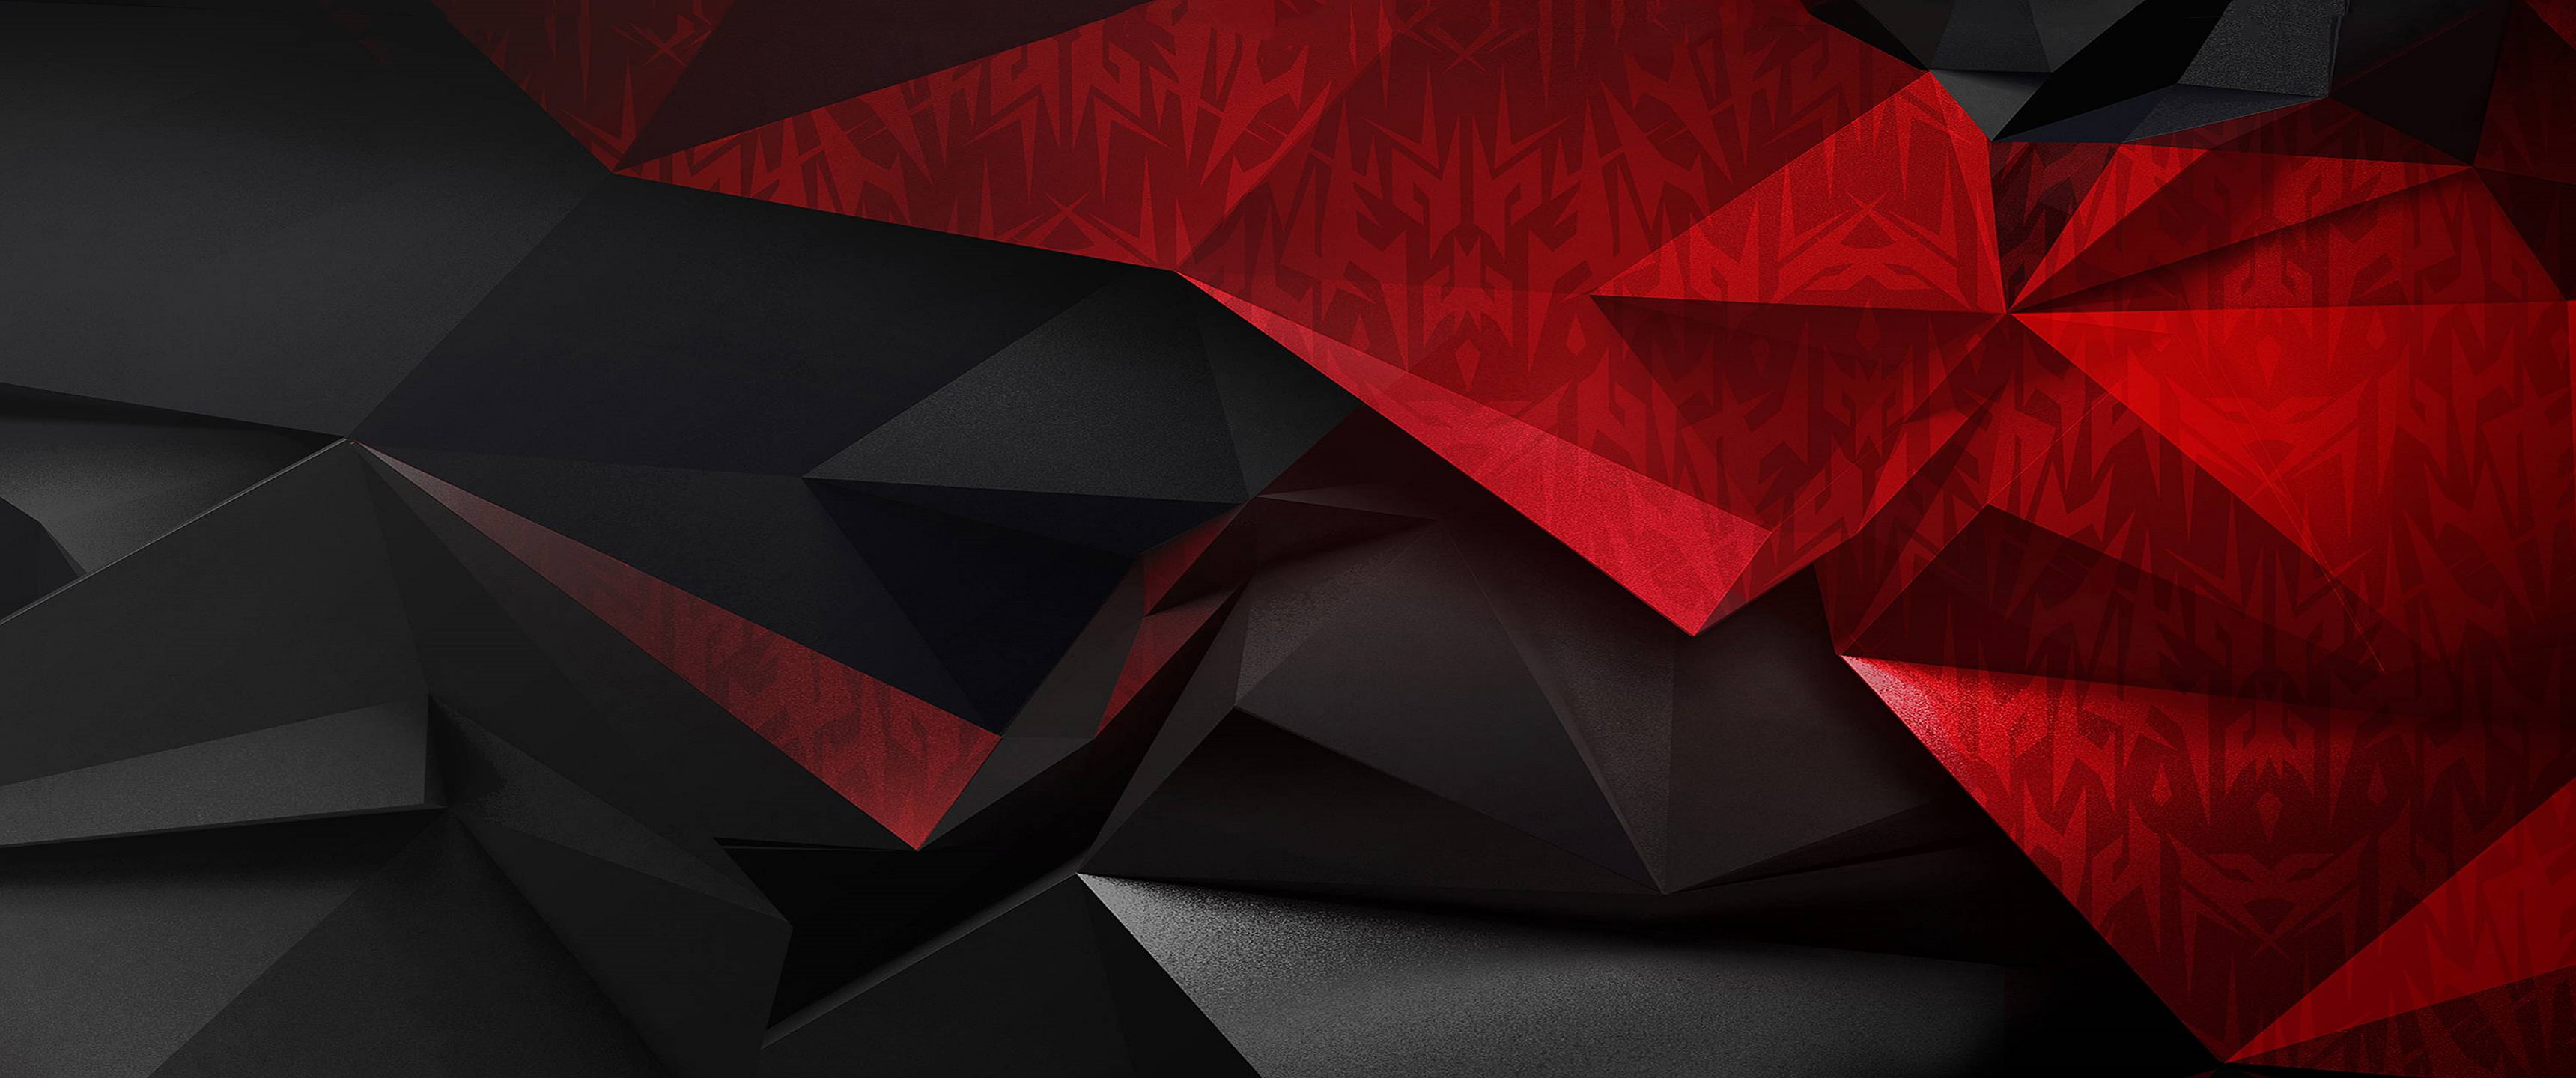 Black And Red Abstract Background - HD Wallpaper 